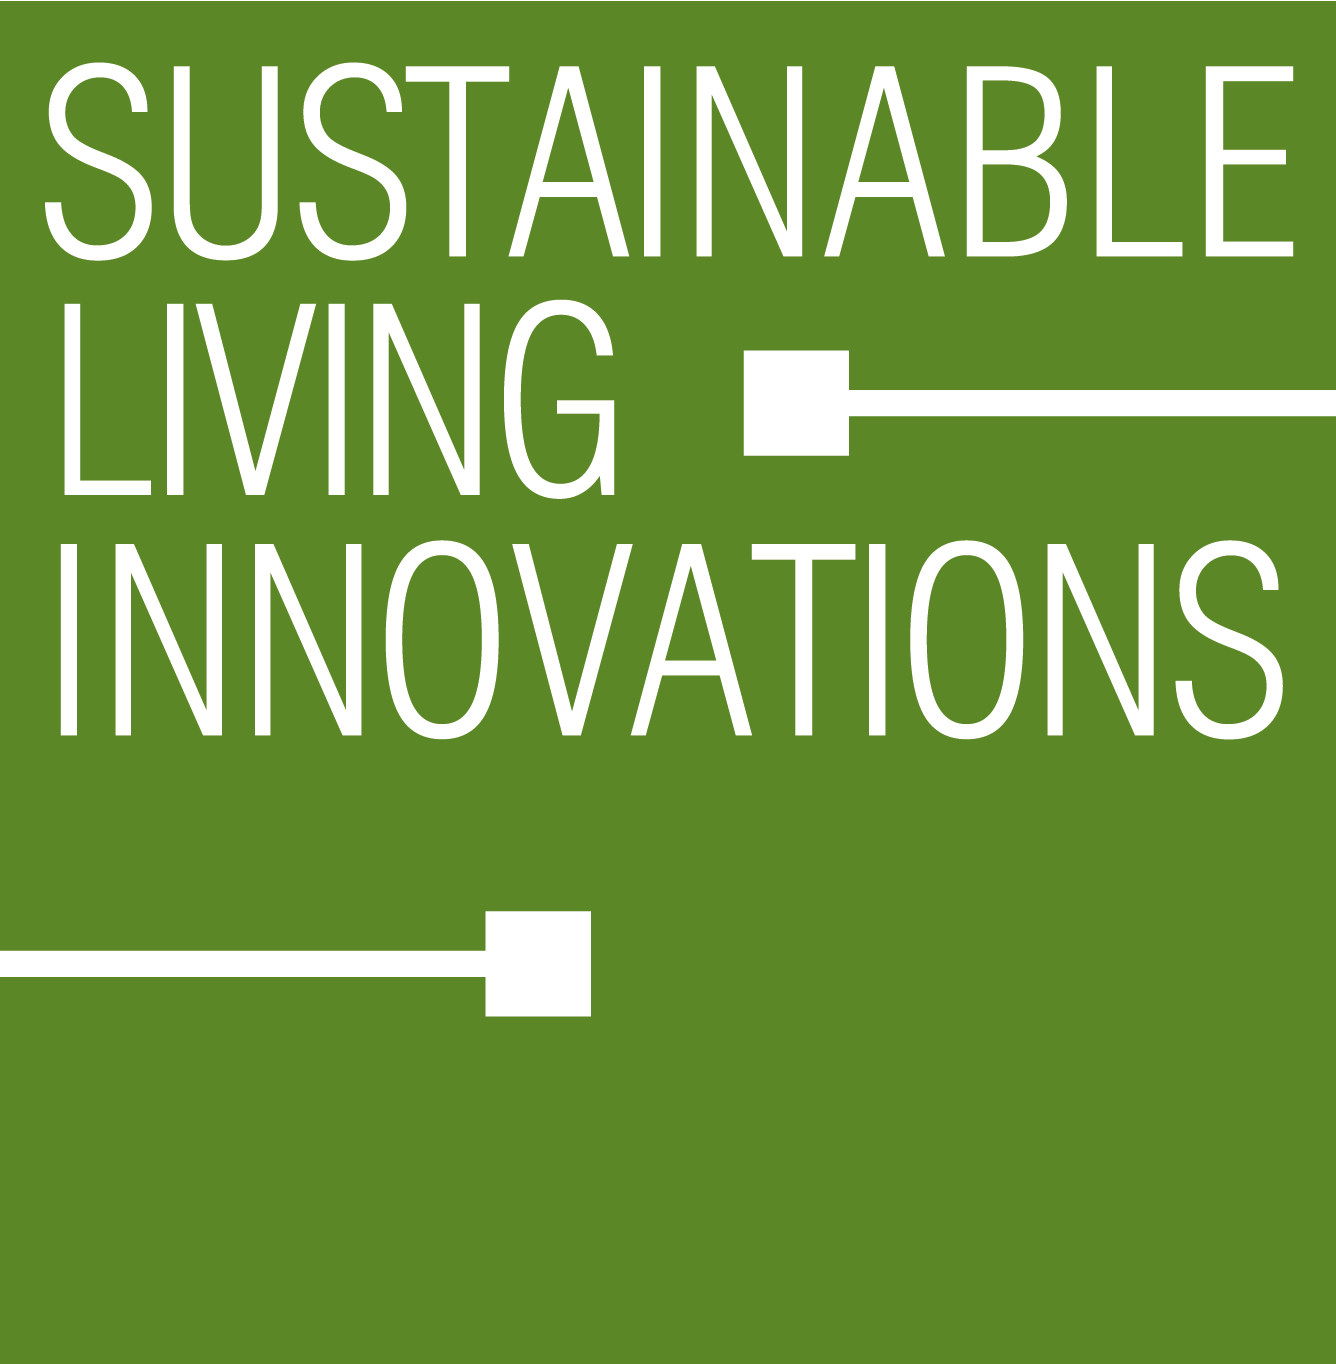 Sustainable Living Innovations Logo